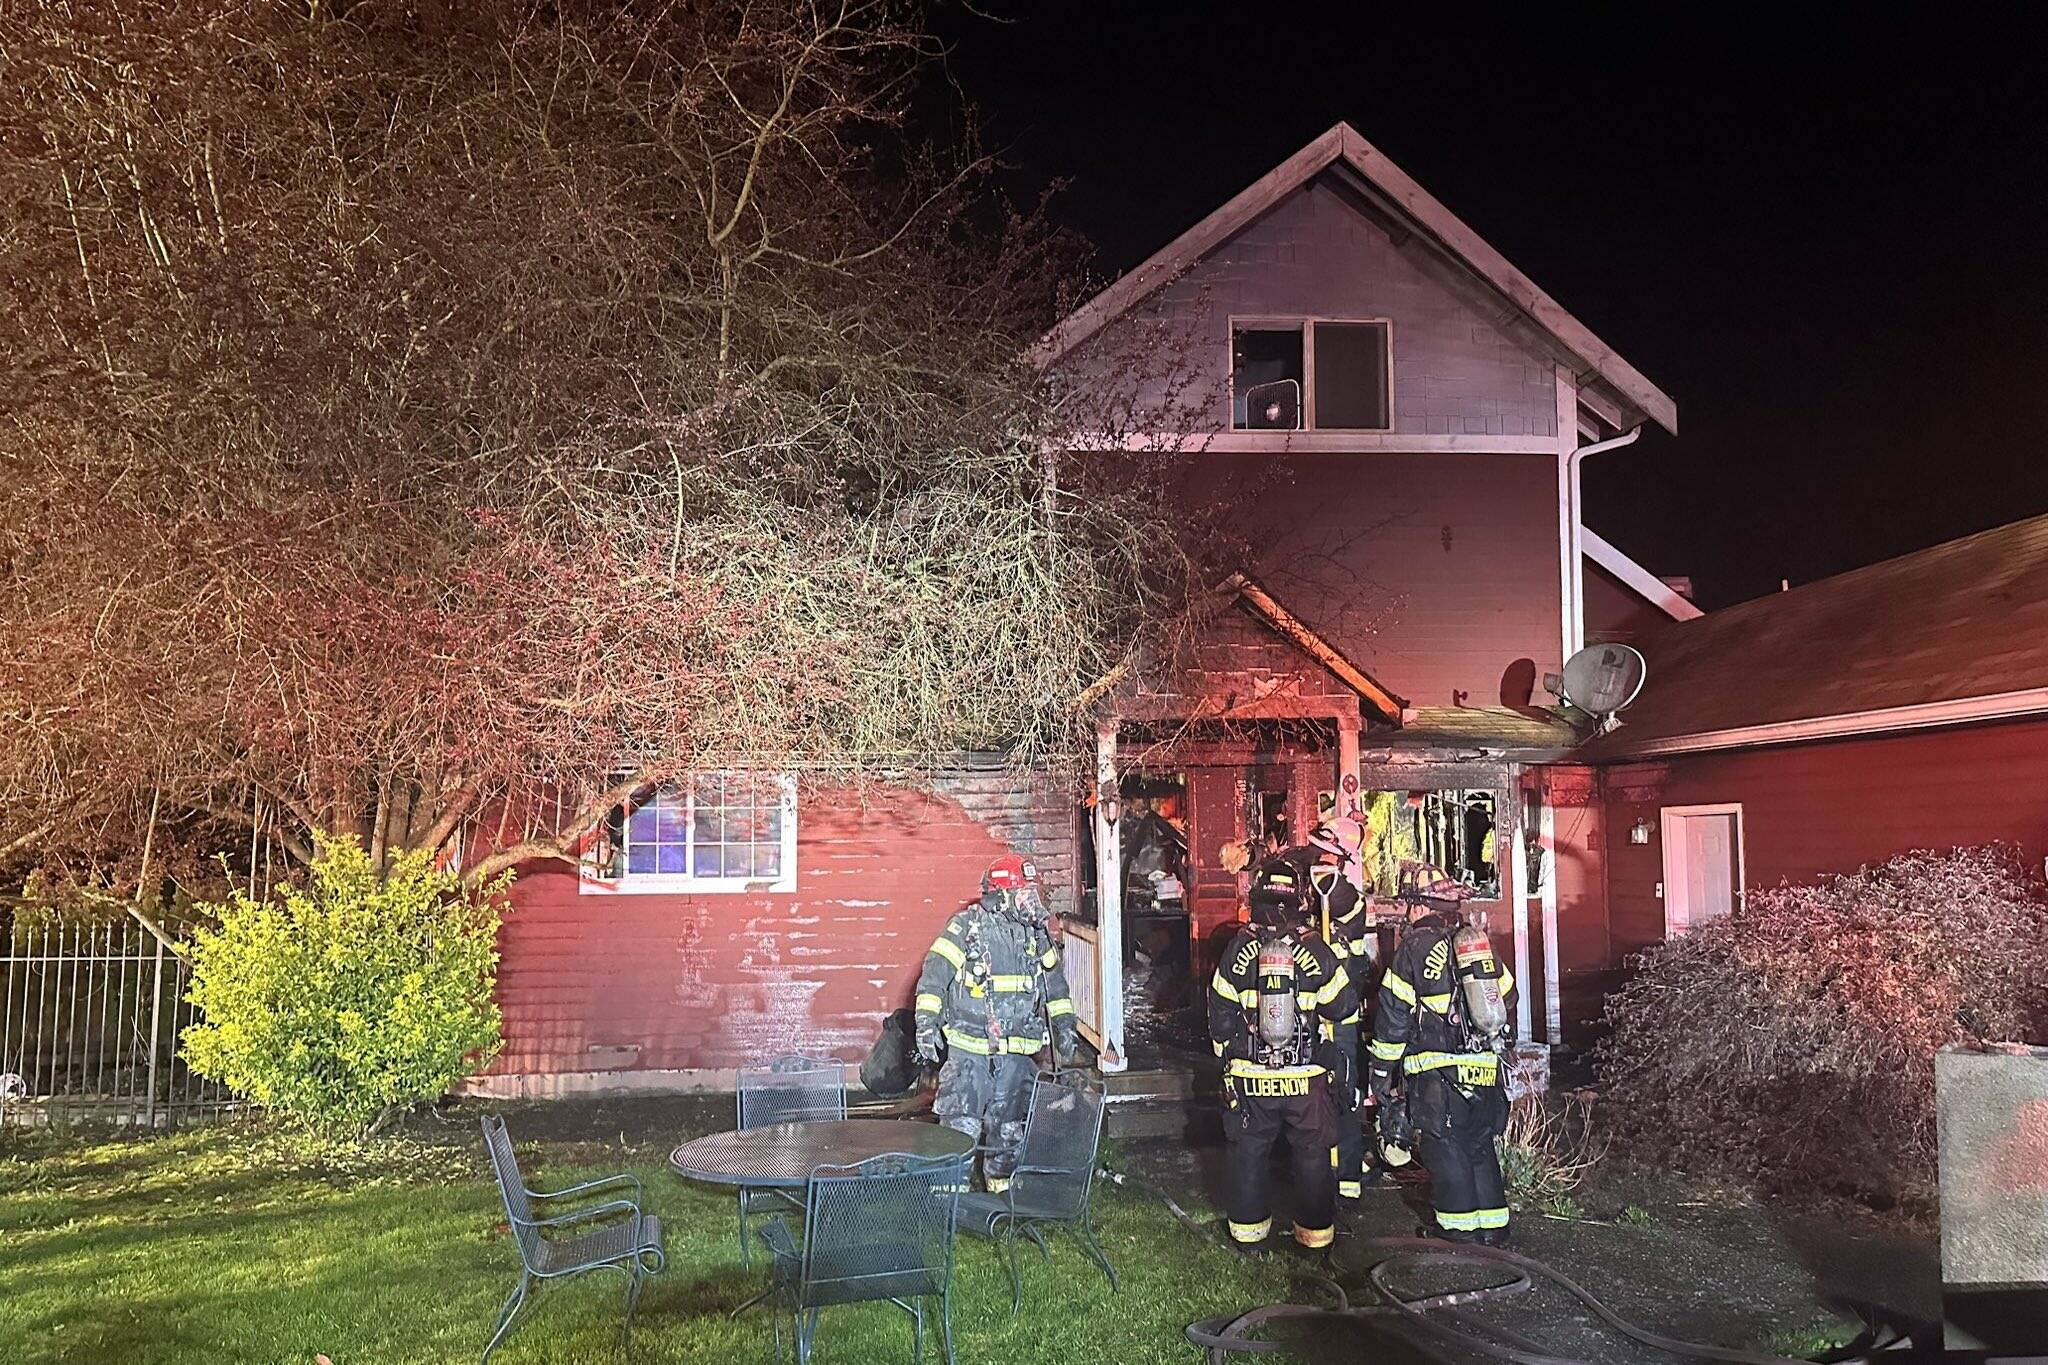 Firefighters respond to smoke alarms Tuesday morning in the 11000 block of 6th Avenue W in Everett, Washington. (Photo provided by South County Fire)